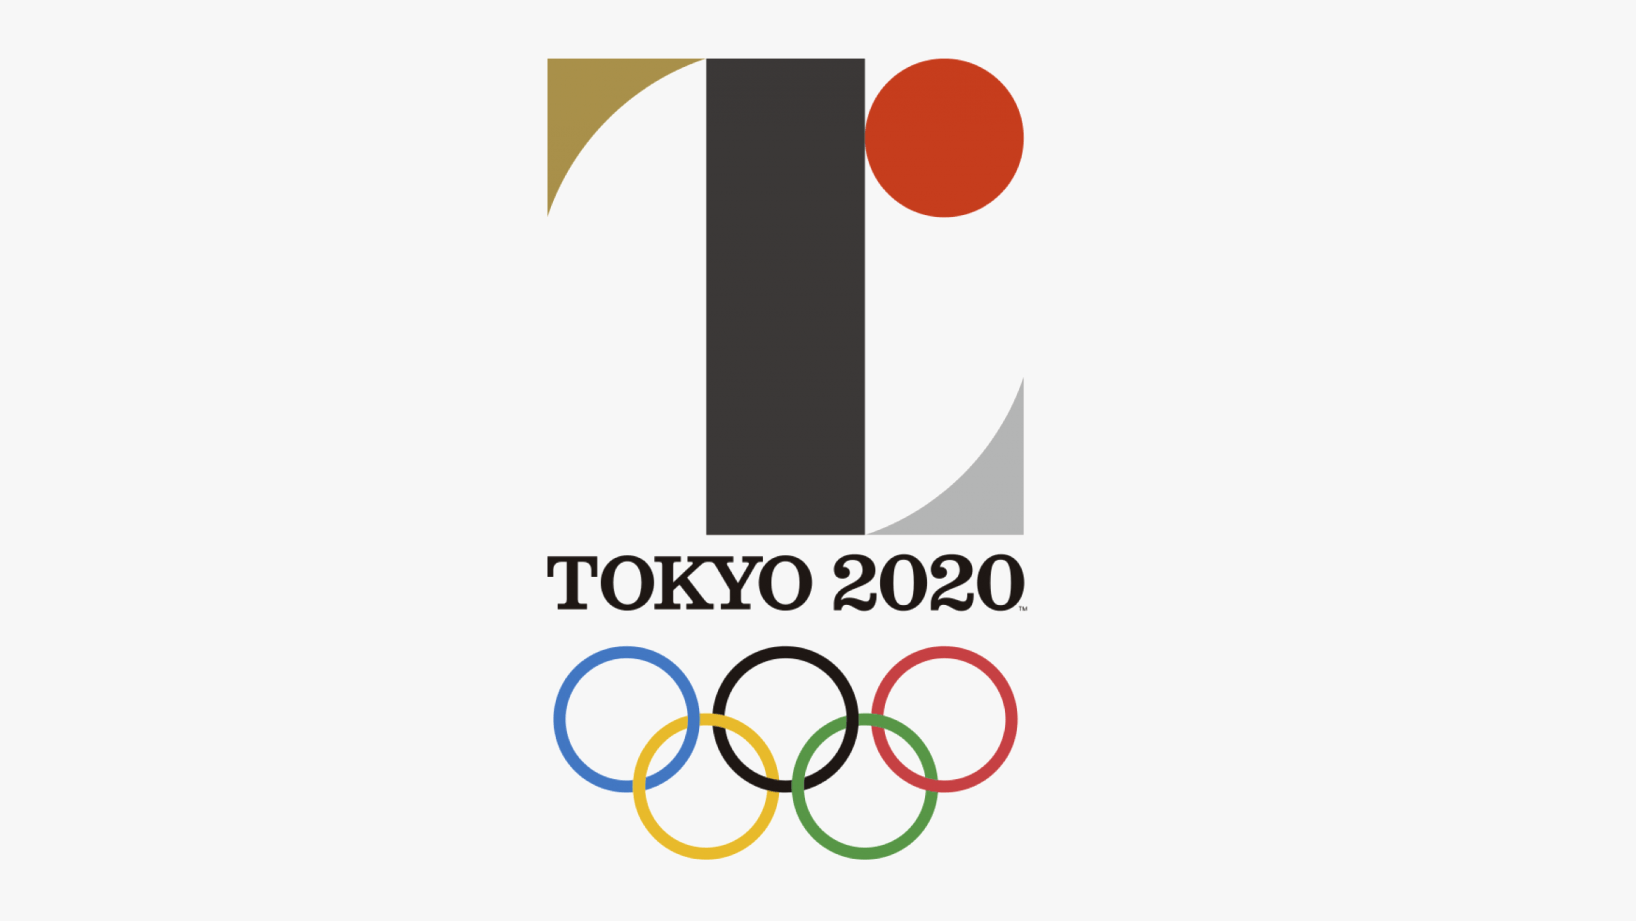 Olimpycs Logo - Why the redesigned Tokyo 2020 Olympics logo is more than just a safe ...